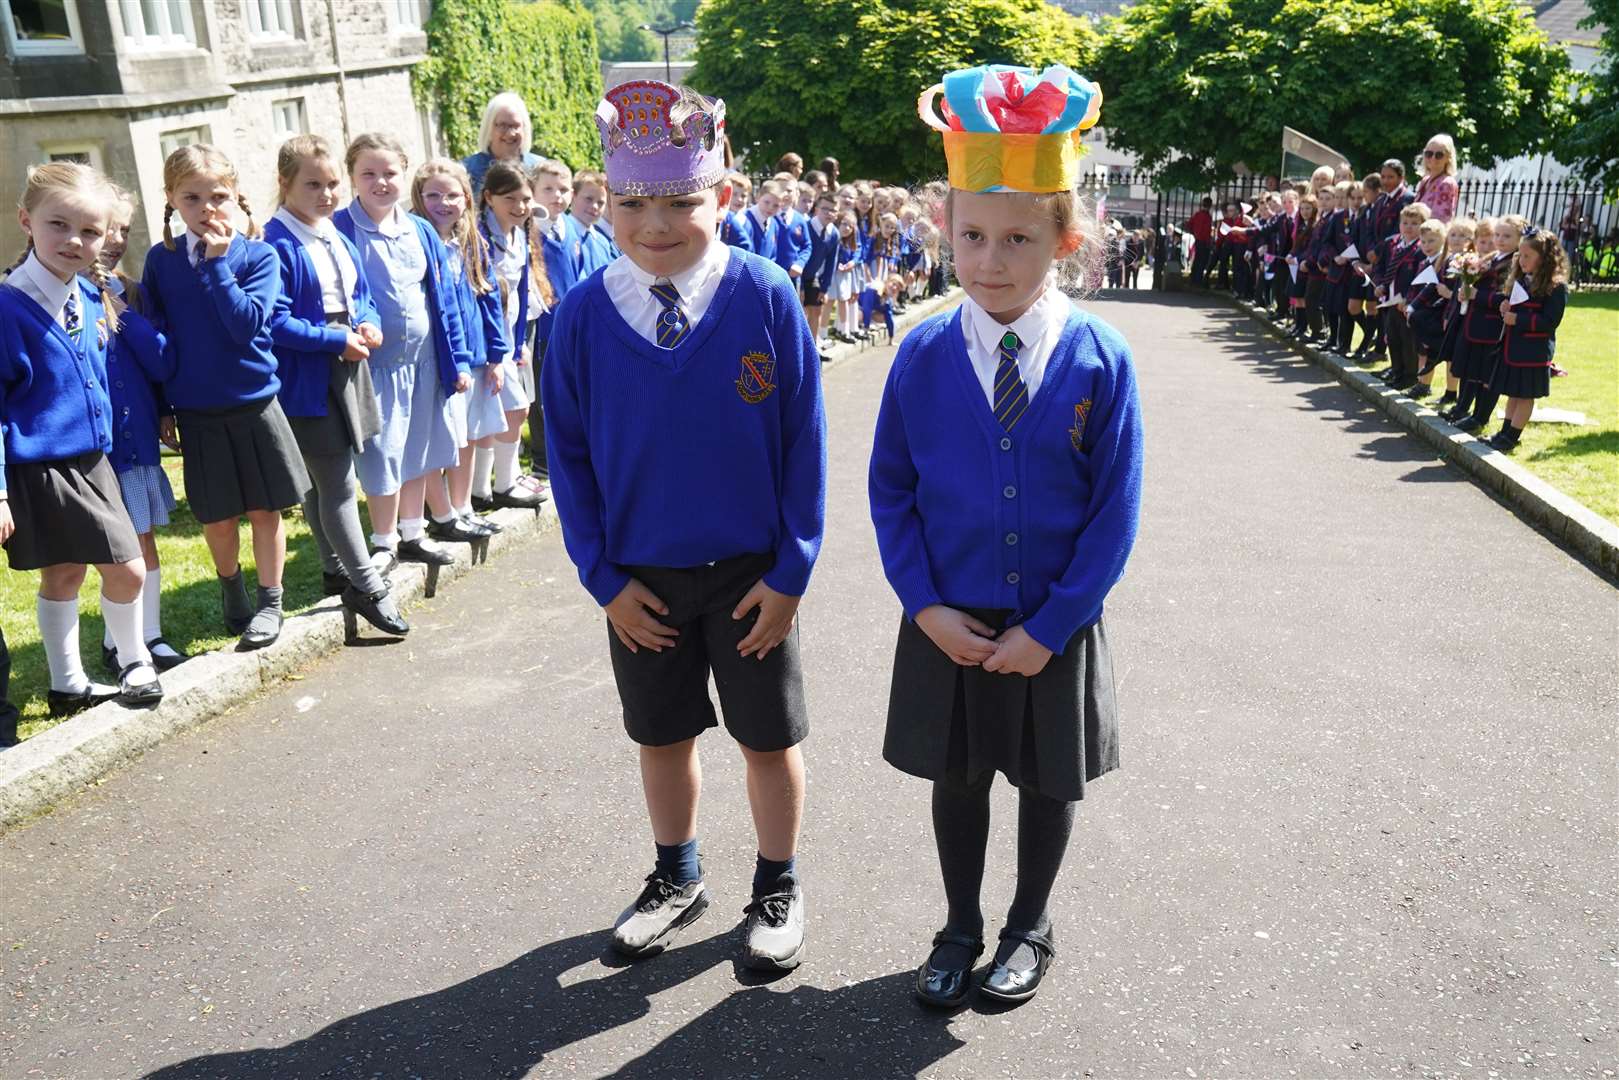 Charles Murray and Camilla Nowawakowska sported paper crowns for the royal visit (Brian Lawless/PA)